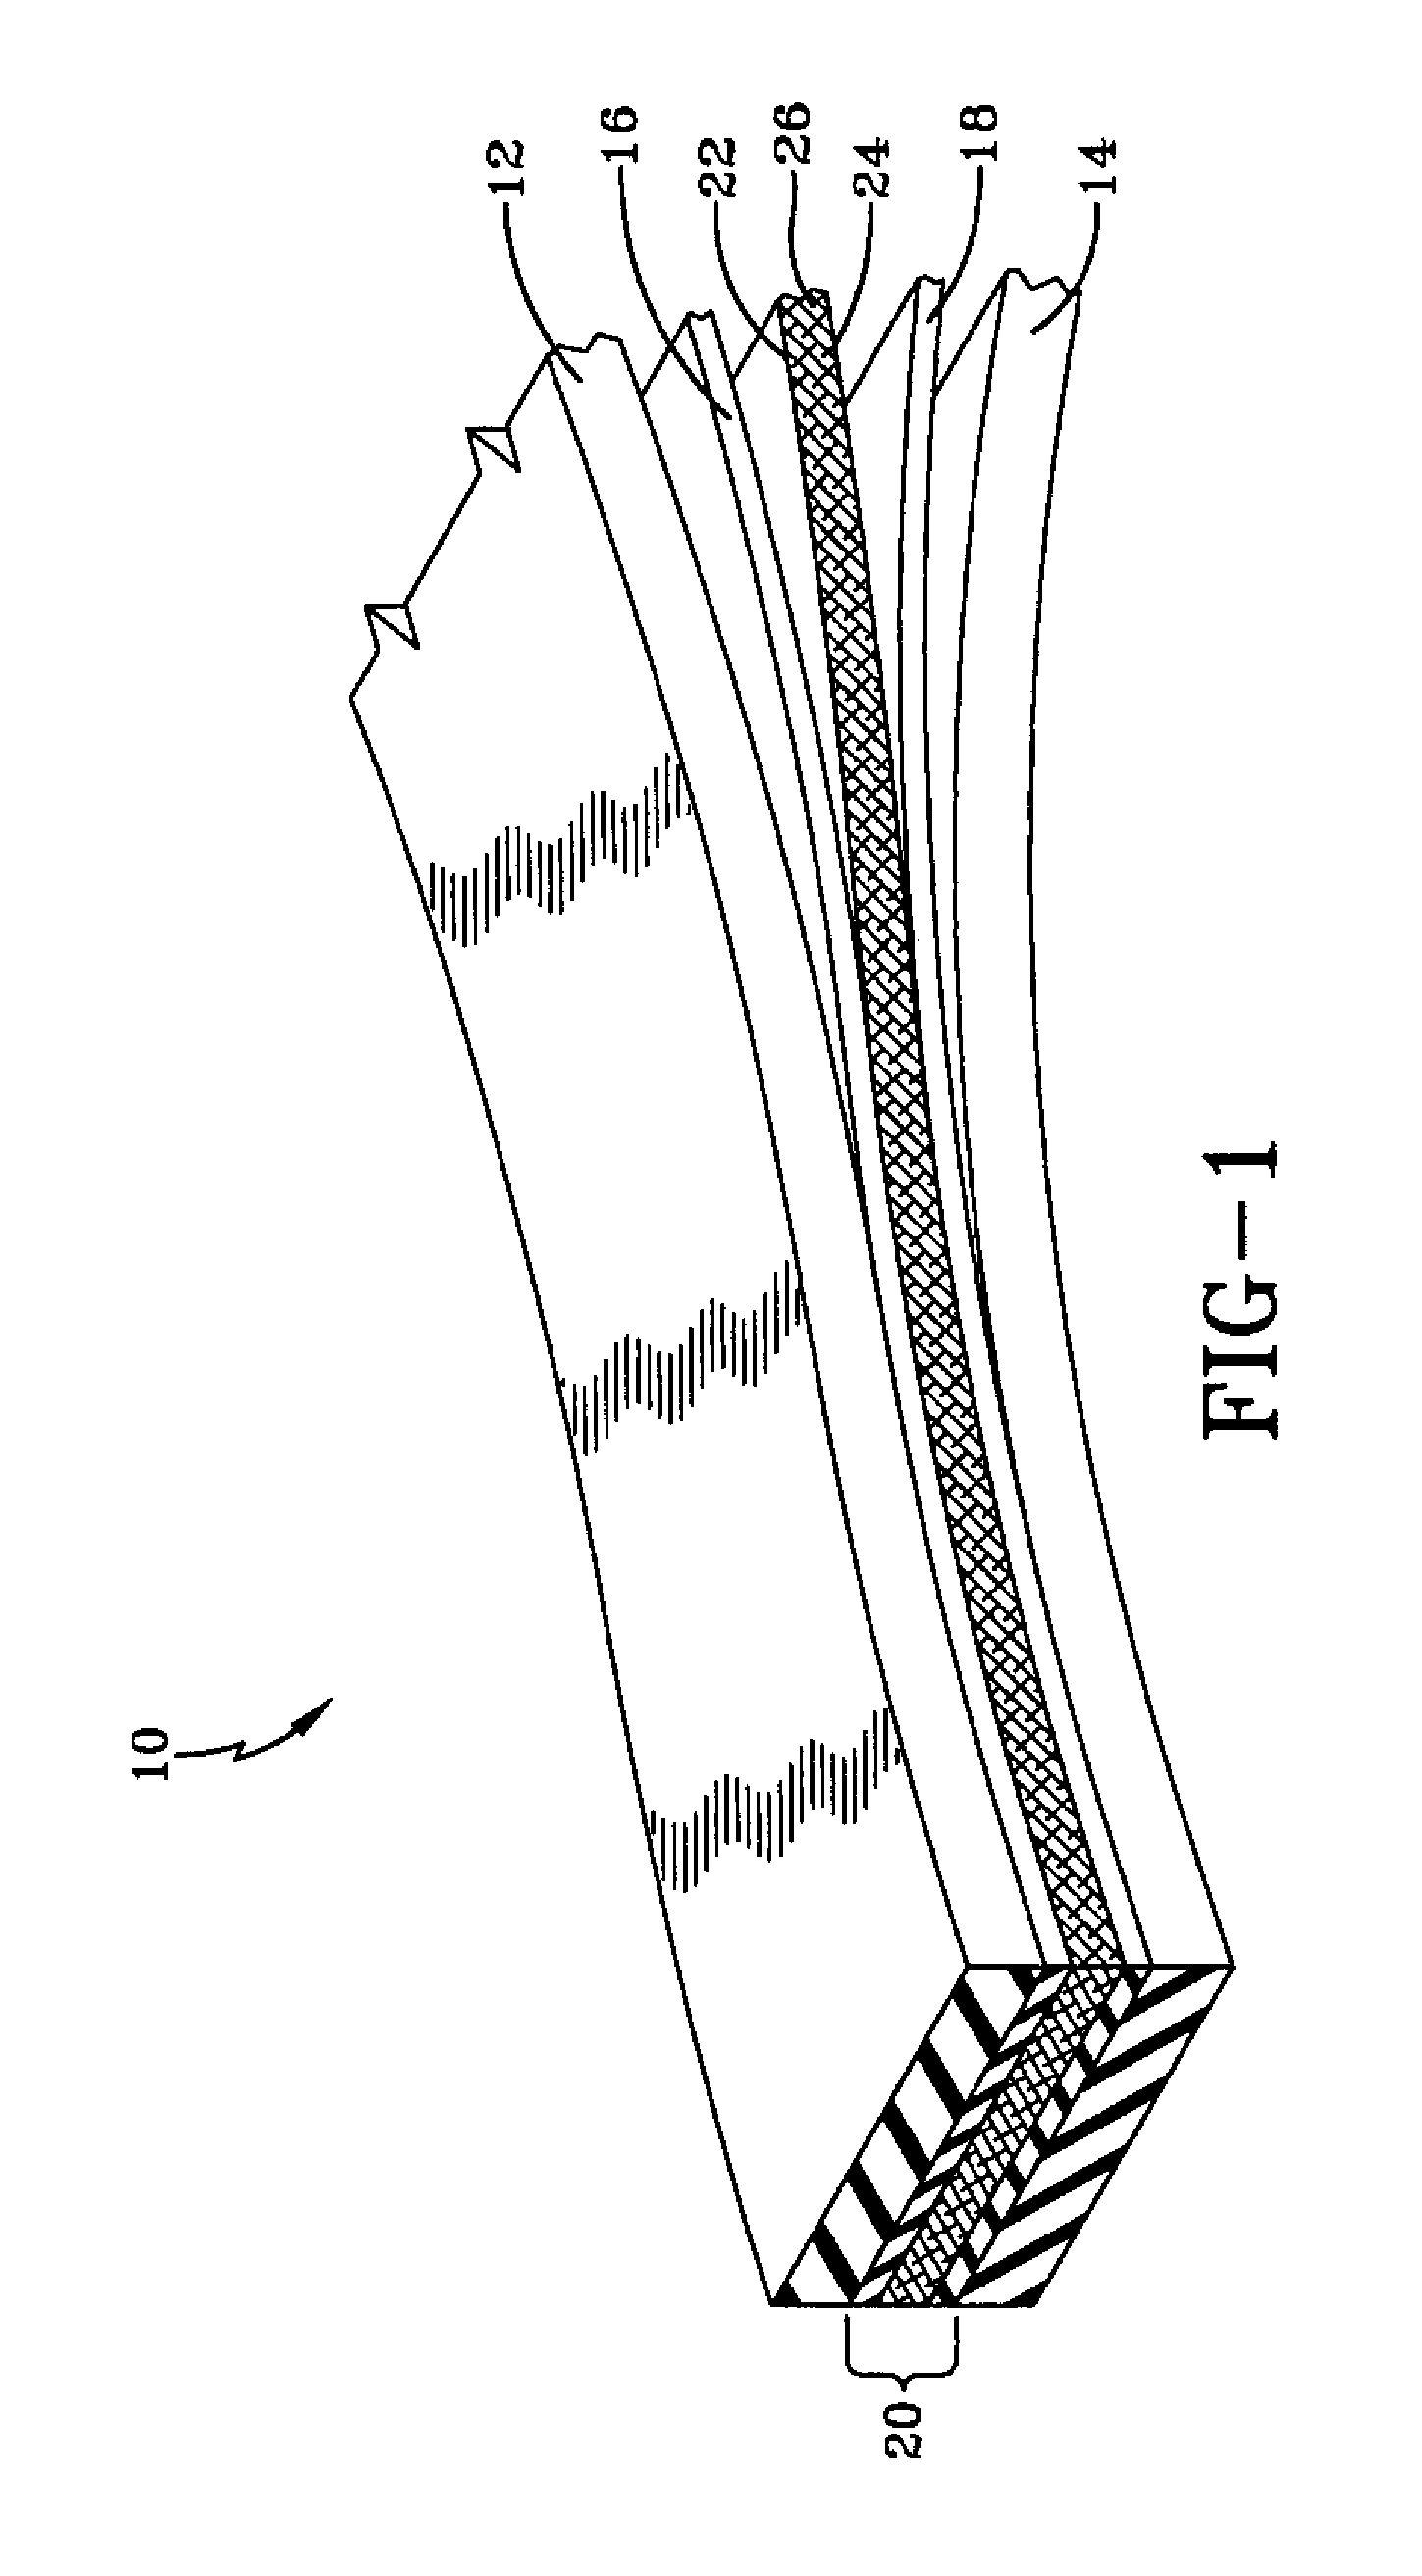 Non-halogenated rubber compounds for use in conveyor belts